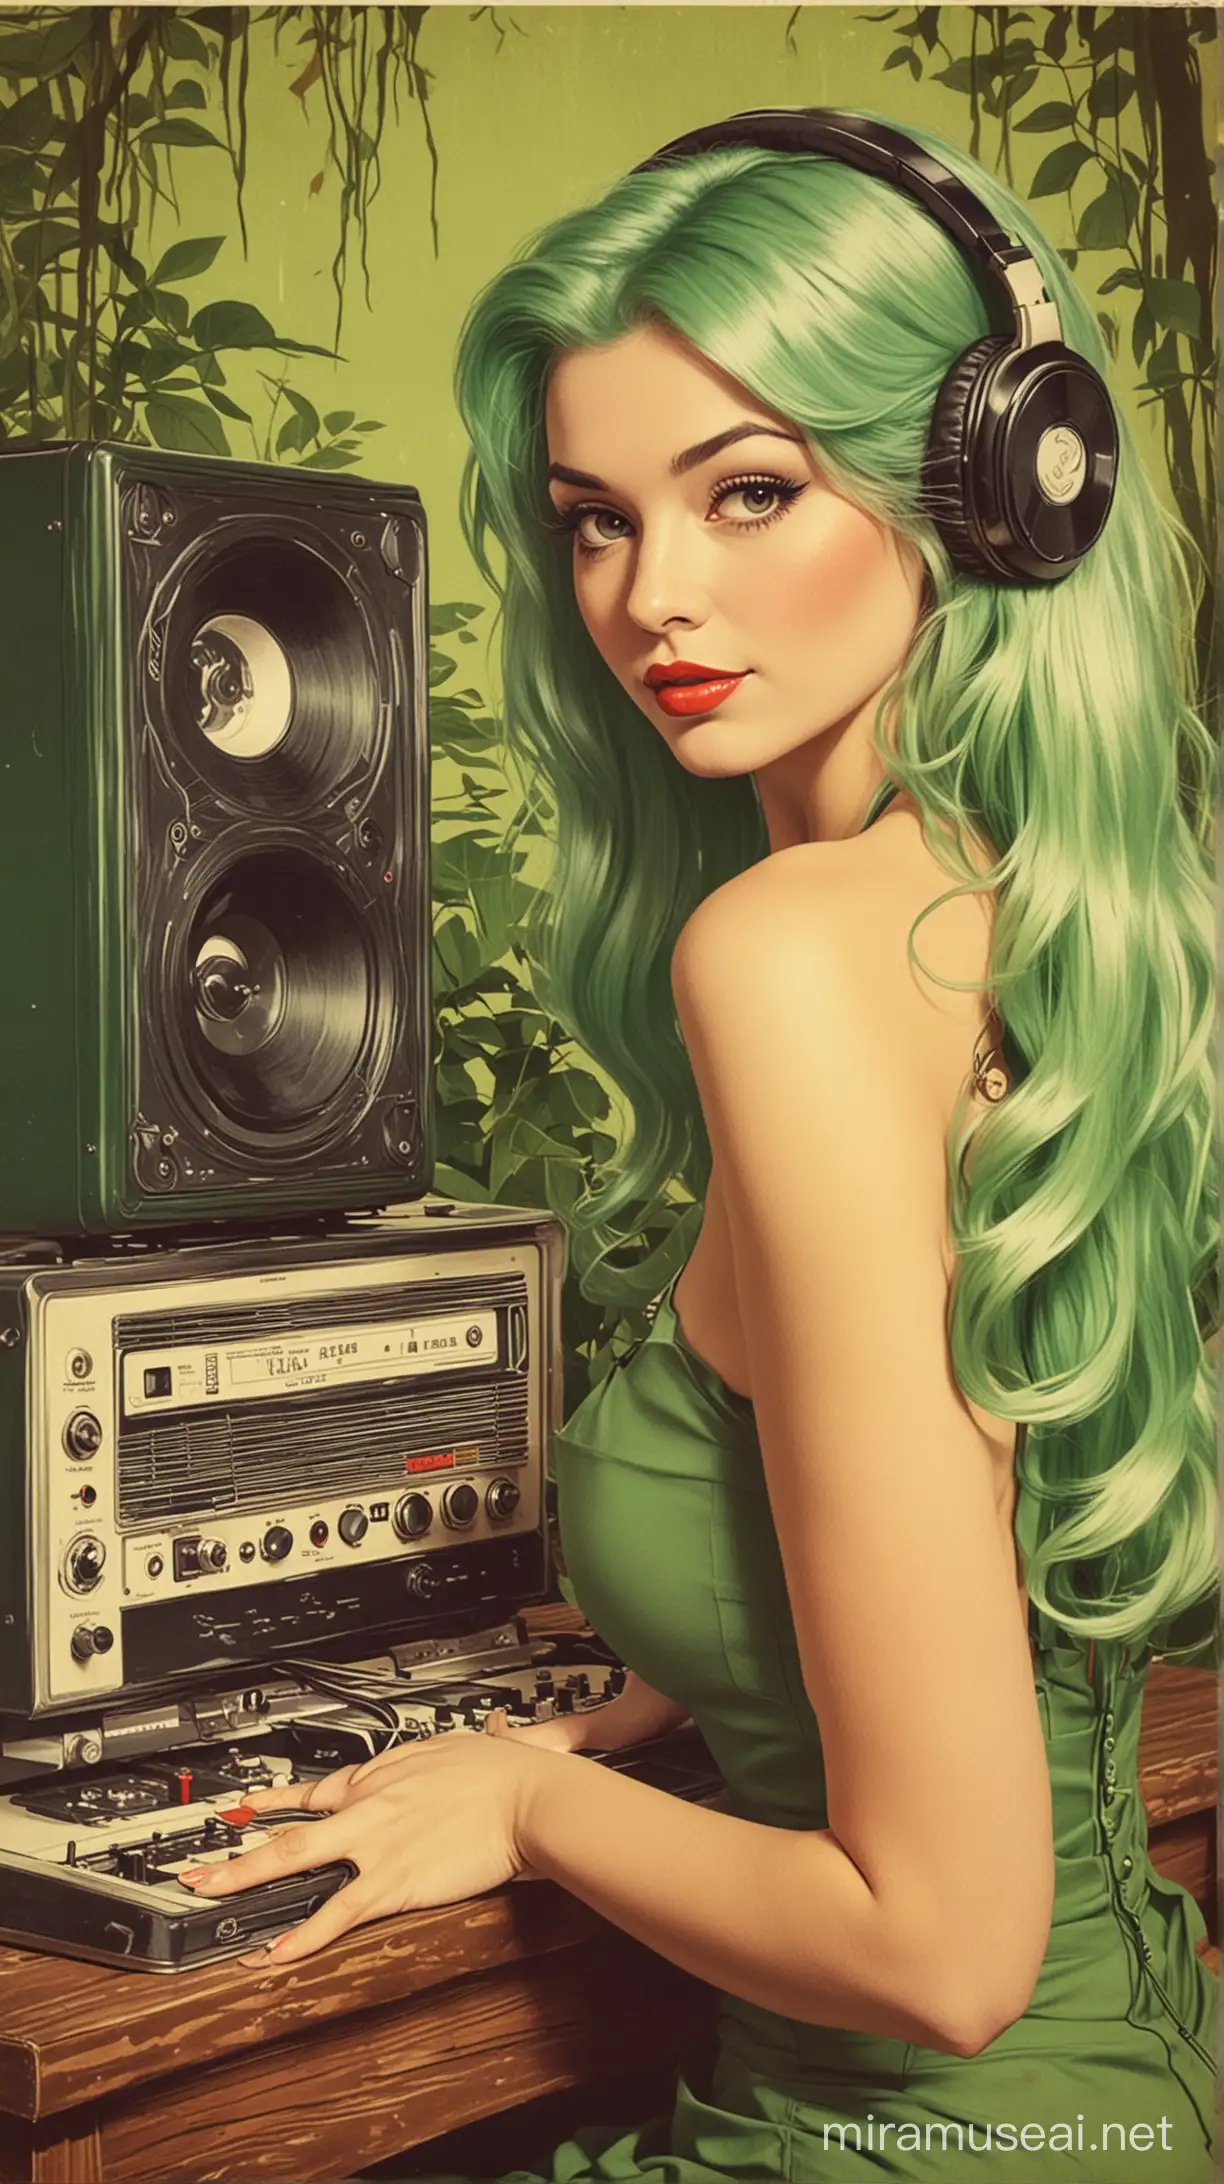 Vintage Pinup Lady with Green Hair Listening to Music in Swamp Composition